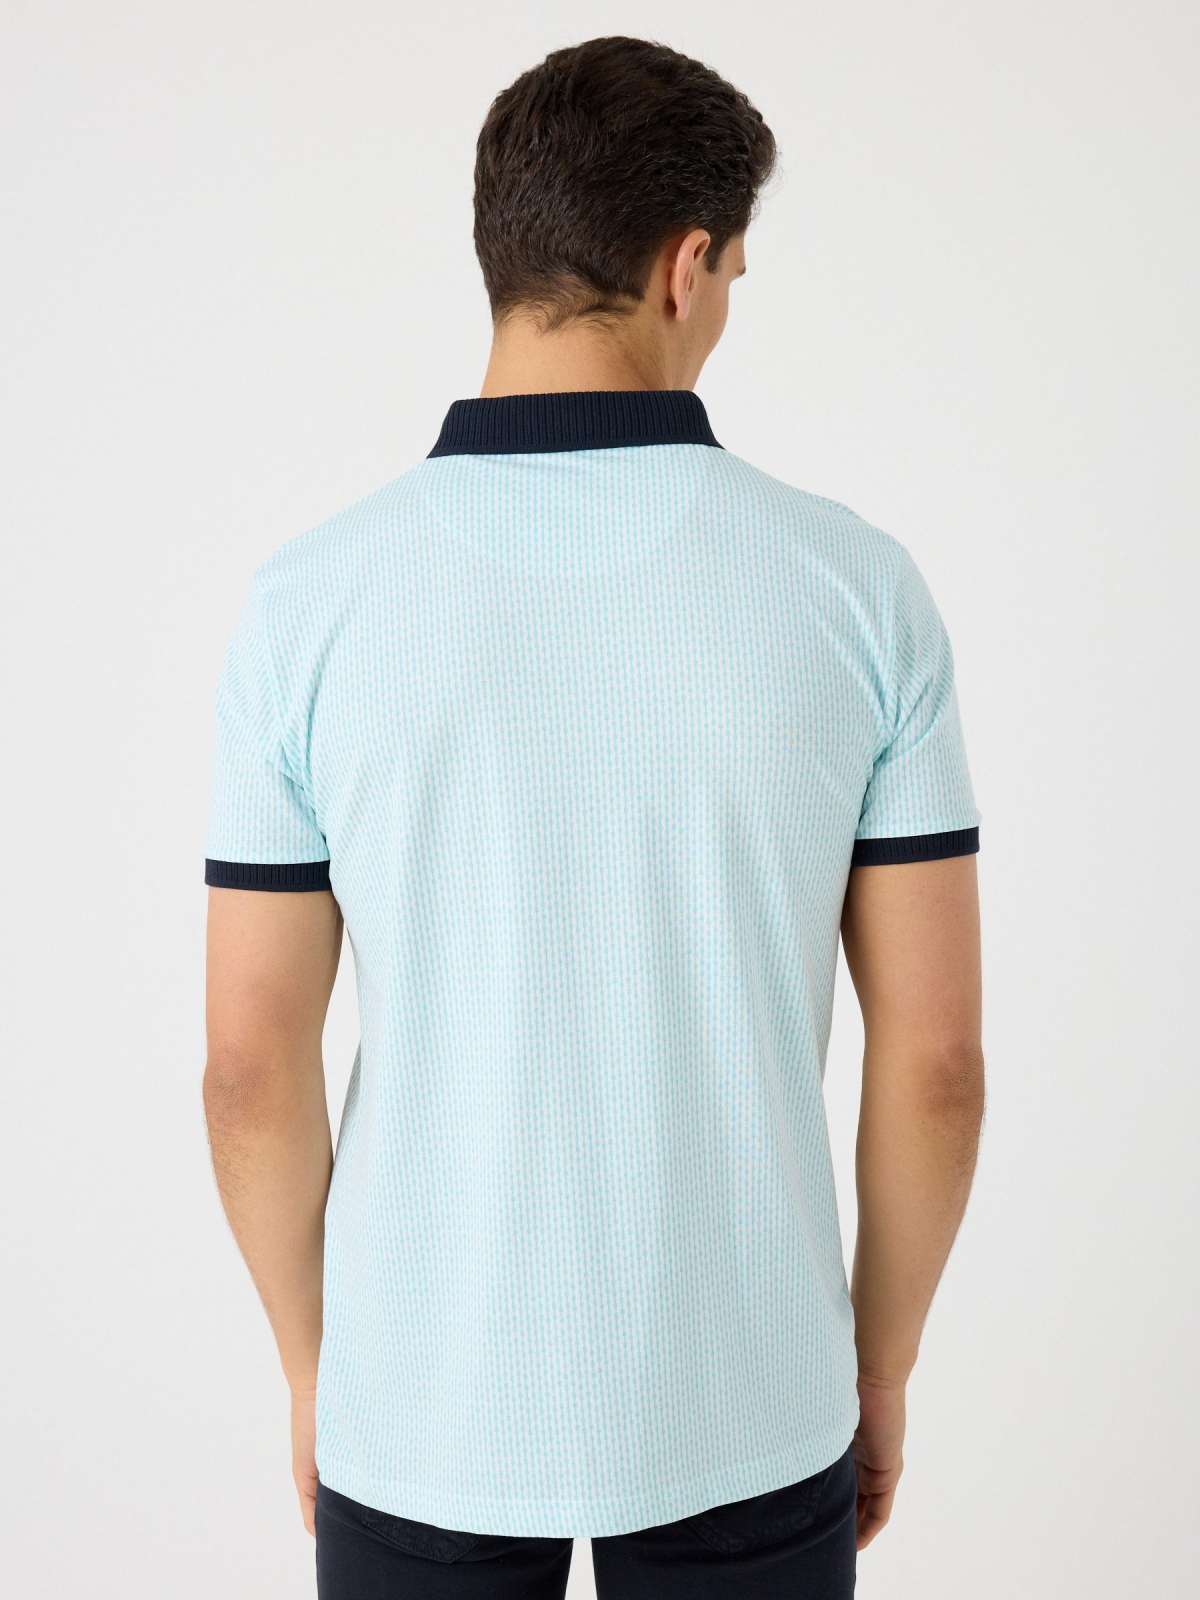 Printed polo shirt with rib details light blue middle back view